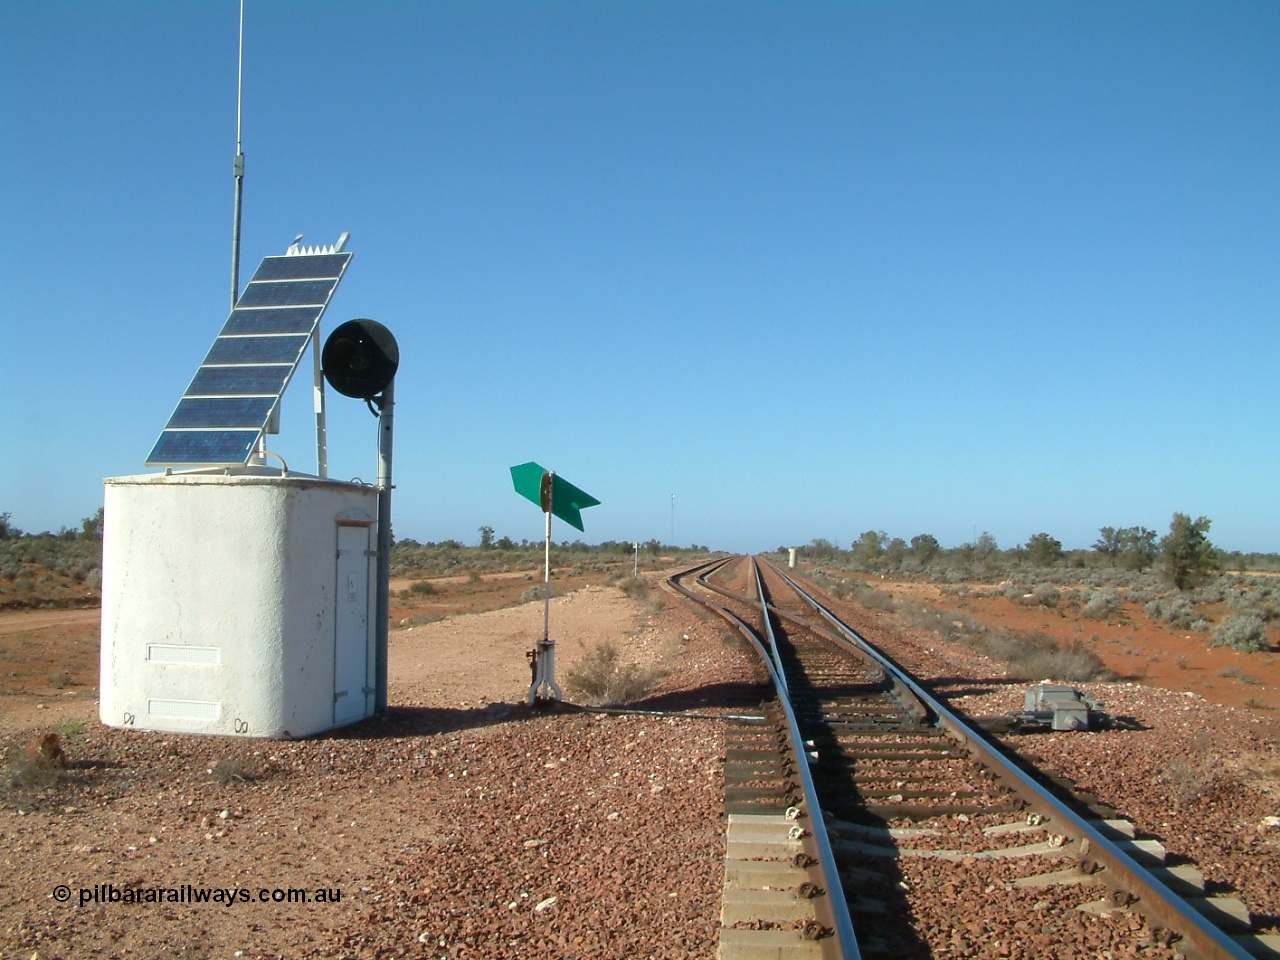 030416 084506
Carnes Siding located at the 566.4 km on the Central Australian line from Tarcoola to Alice Springs. Looking south from the north end of the loop, interlocking hut with repeater searchlight signal, point indicator and dual control point machine, in the distance the north end train control 'pillbox' can be seen. [url=https://goo.gl/maps/UV5pRwSrTaW3bxA76]GeoData location[/url]. 16th April 2003.
